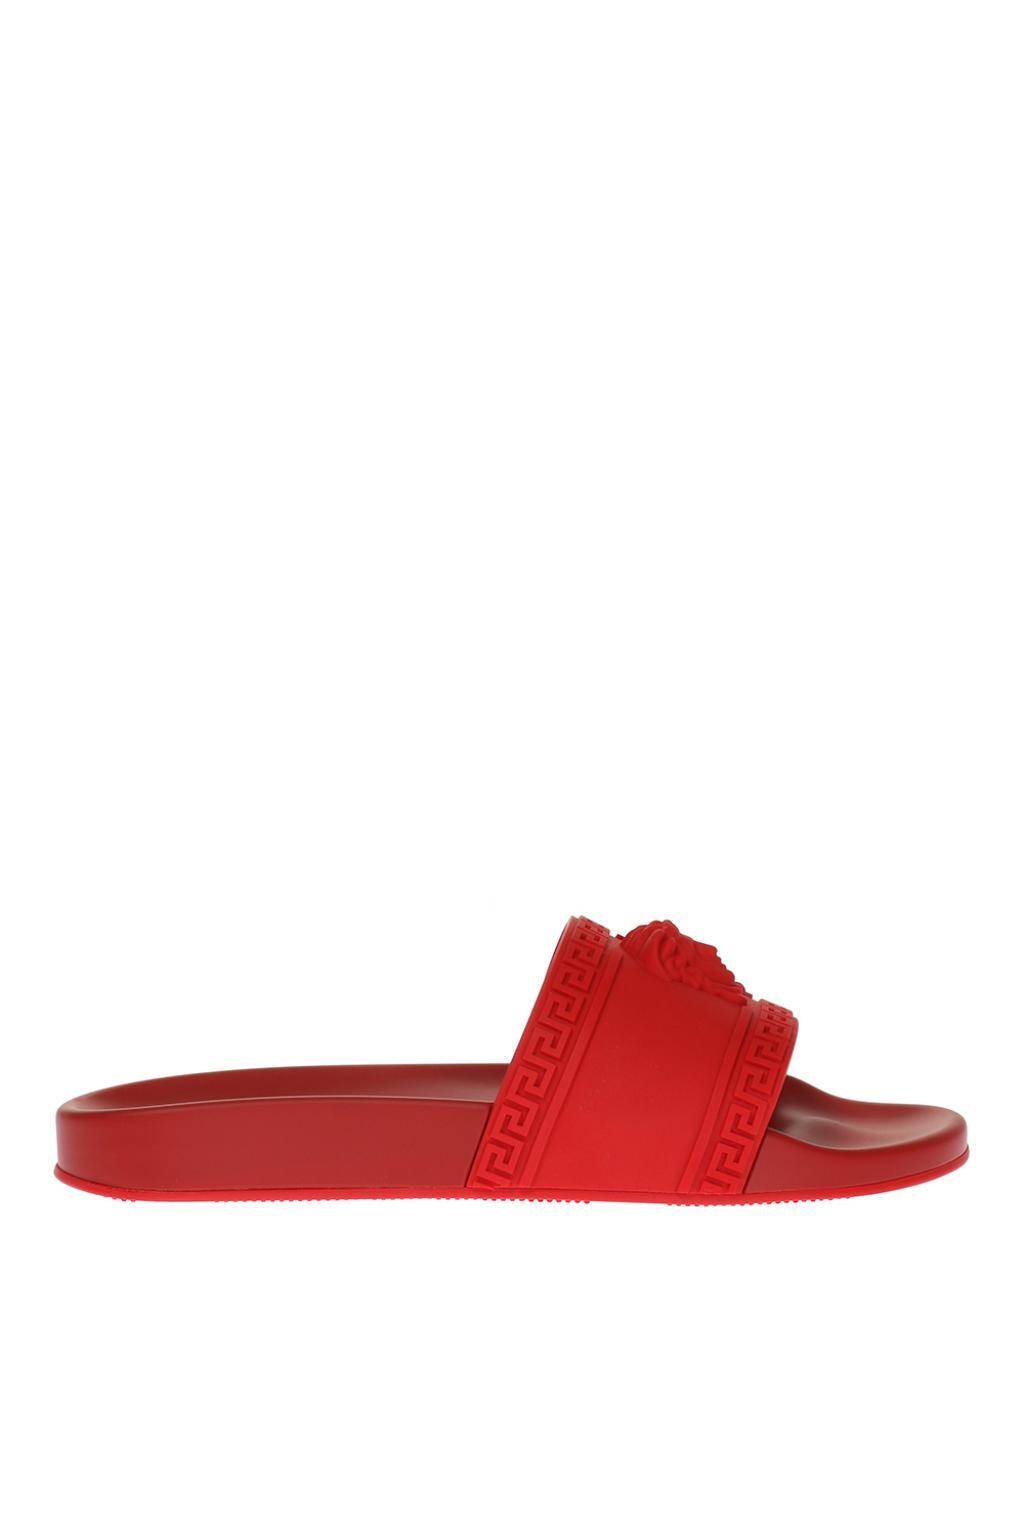 Versace Rubber Sliders in Red for Men - Lyst